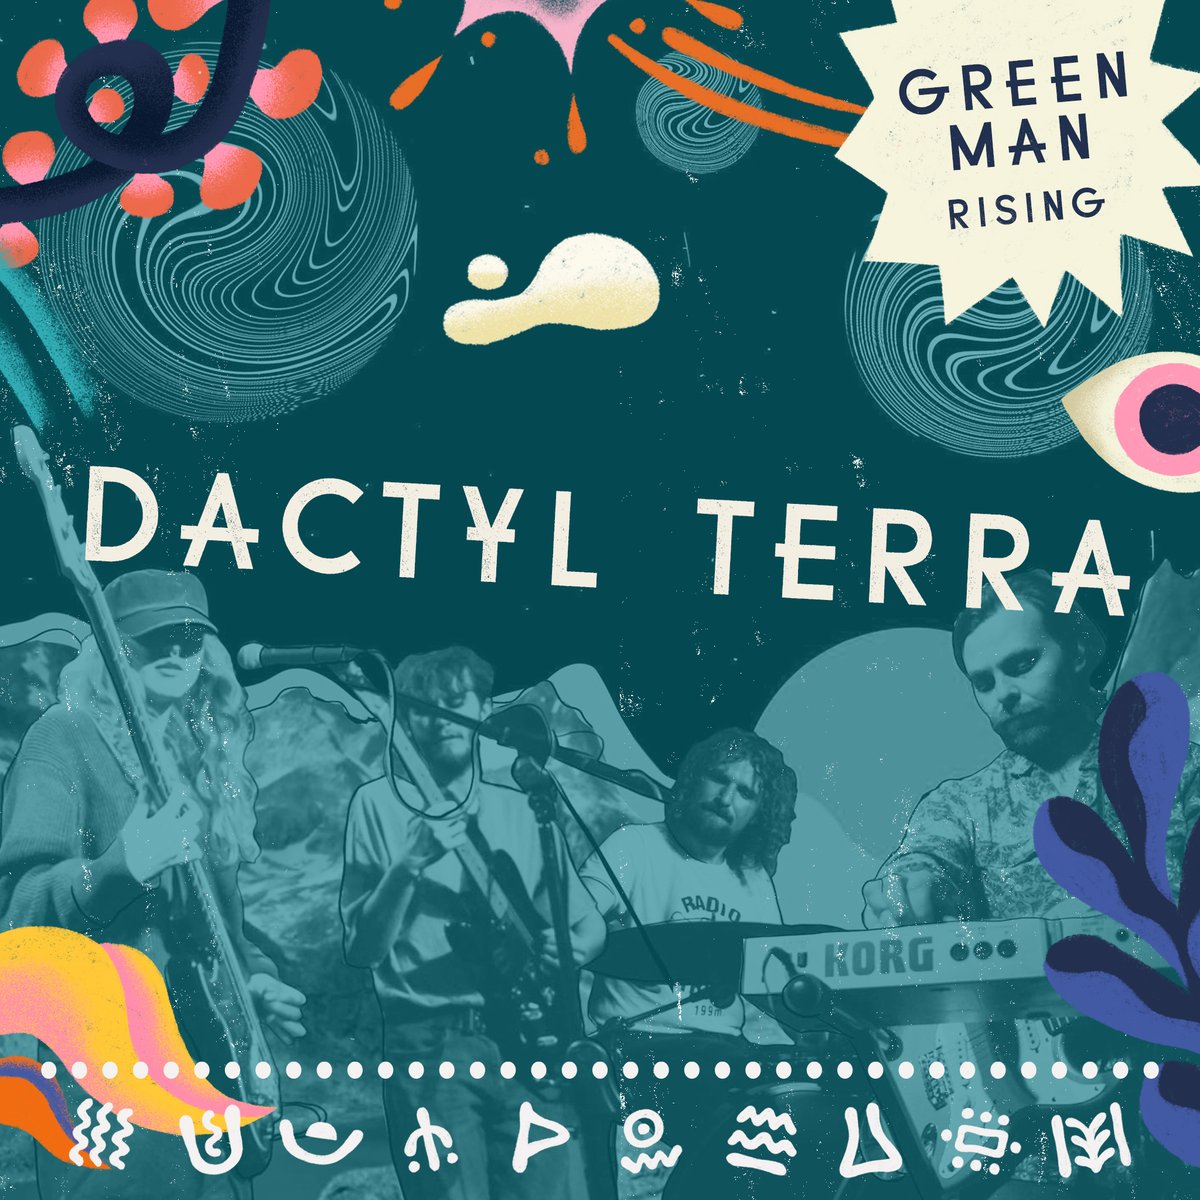 Overjoyed to announce our GM Rising 2022 winners are the phenomenal @dactylterraband! 🏴󠁧󠁢󠁷󠁬󠁳󠁿👏 From thousands of entries & votes cast, our panel of industry maestros picked Dactyl Terra to bring their rollicking sound to the Mountain Stage this August!